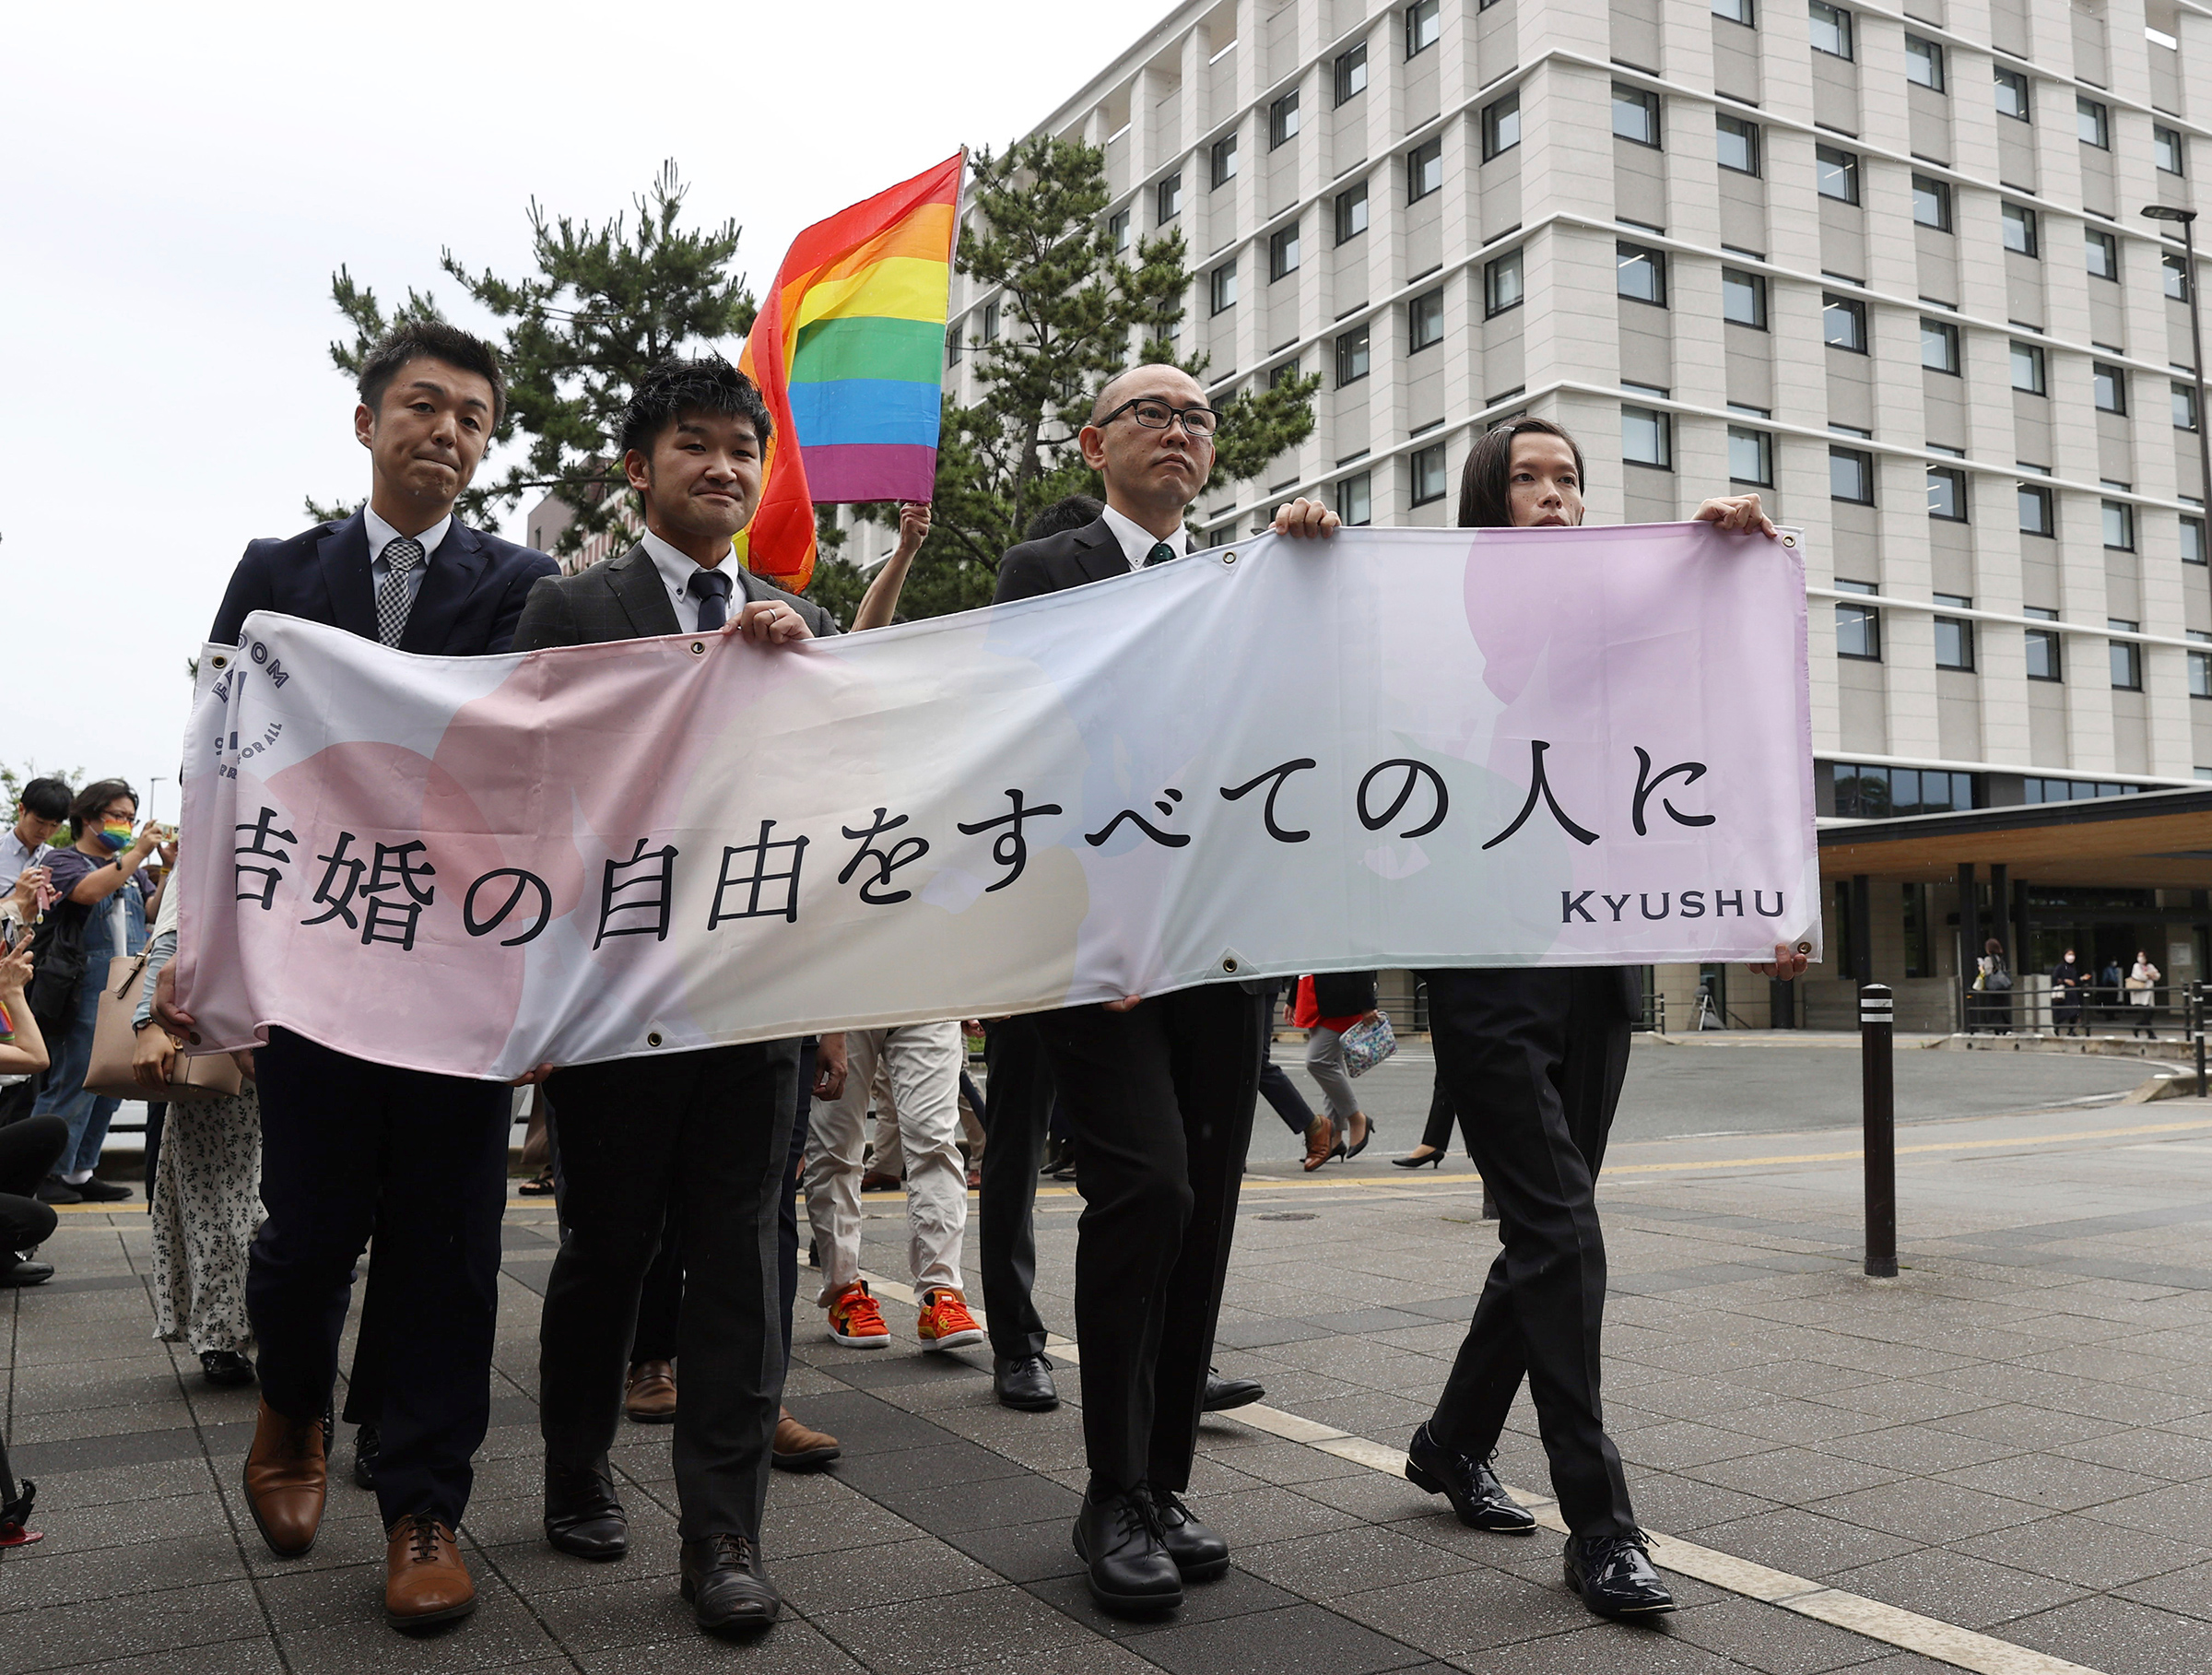 Plaintiffs head to the court for the same-gender marriage lawsuit at the Fukuoka District Court on June 8, holding a banner that reads "Marriage freedom for all." (The Yomiuri Shimbun/AP)